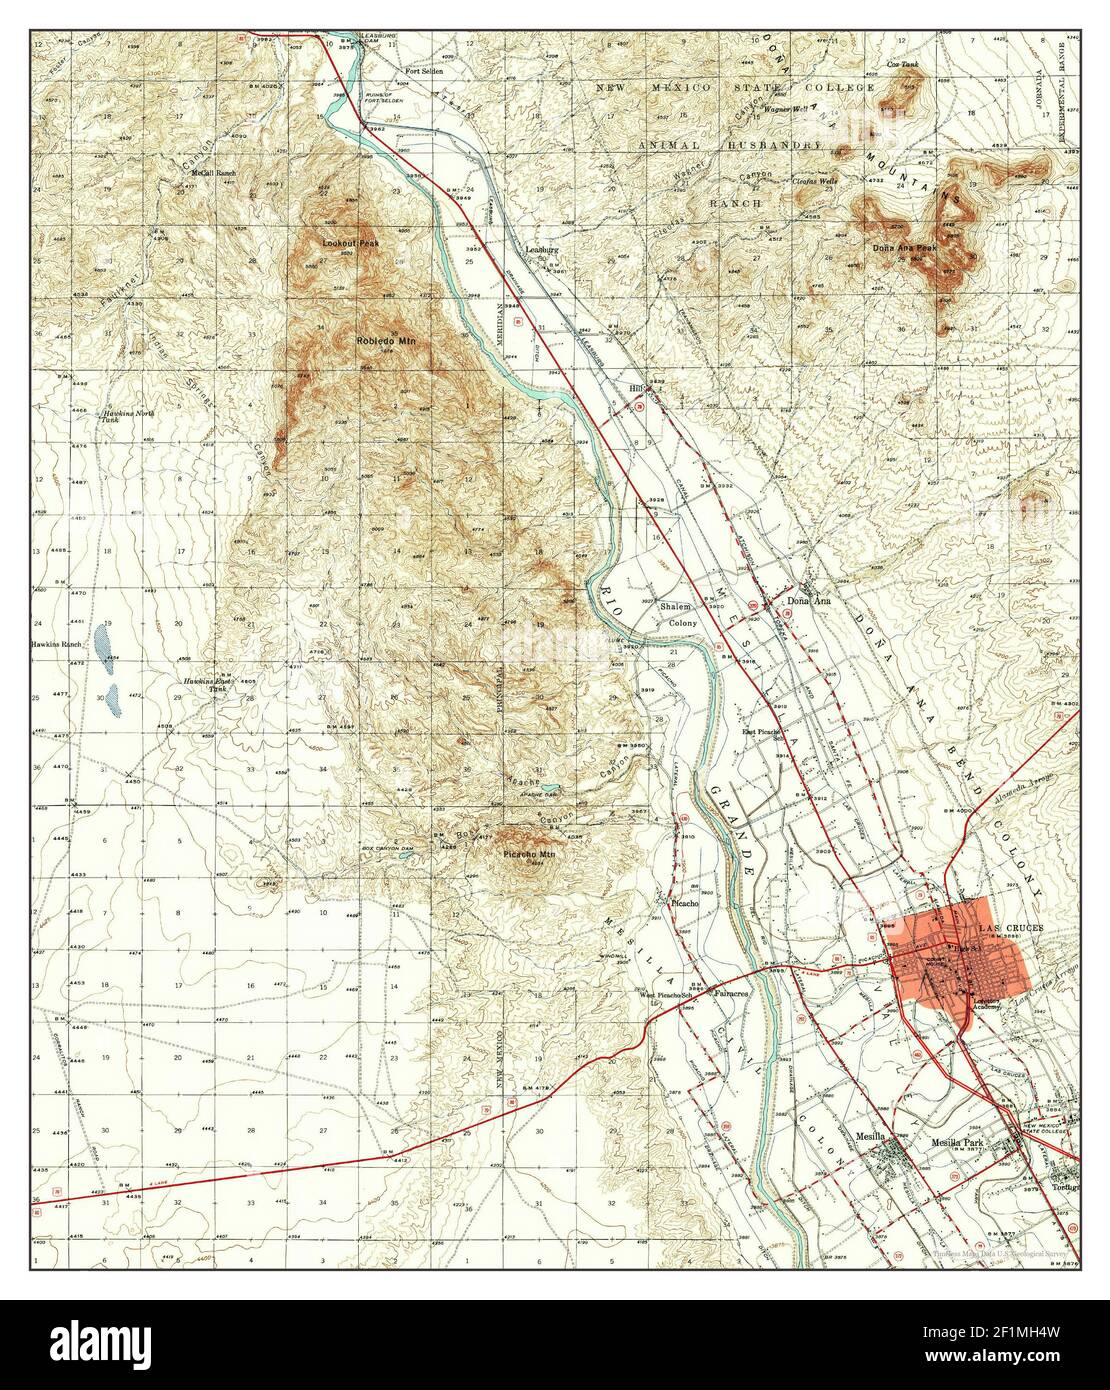 Las Cruces, New Mexico, map 1941, 1:62500, United States of America by  Timeless Maps, data U.S. Geological Survey Stock Photo - Alamy